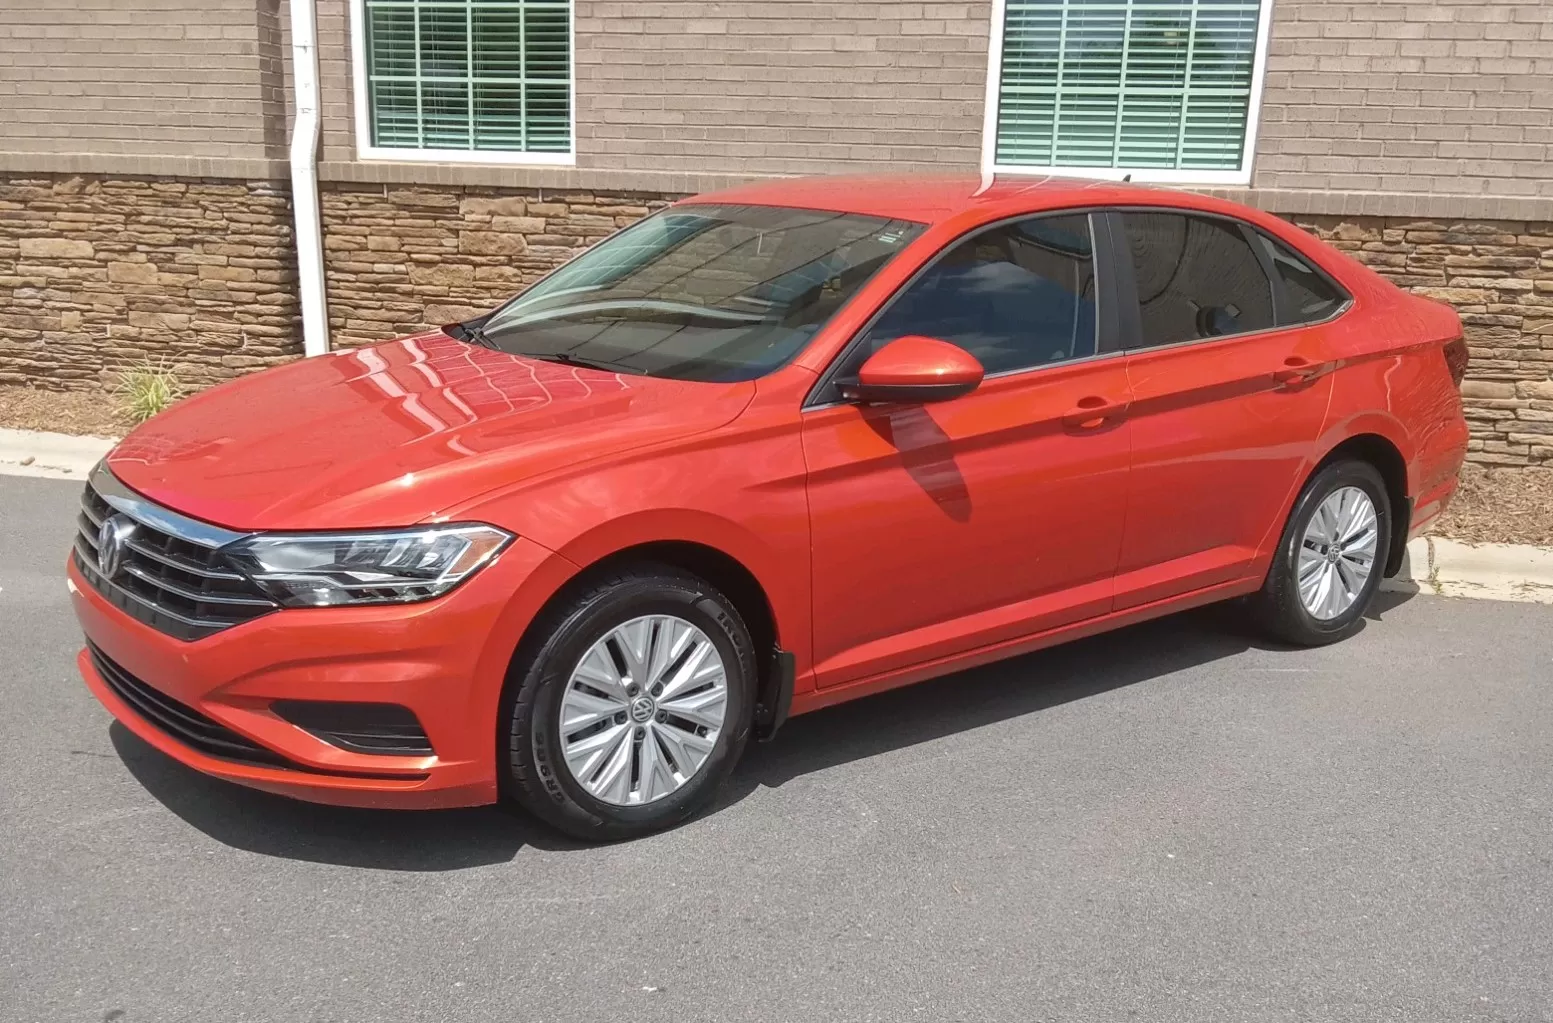 2020 Volkswagen Jetta 4D S $18,850 VIN:   3VWCB7BU1LM047990 Mileage: 34,583  Features:   1.4L I4 Turbo, A/C, Power Windows, Locks, Tilt Wheel, Cruise Control, Audio Am/FM/ Stereo, Automatic Transmission, Back-Up Camera, and Alloy/Aluminum Wheels.